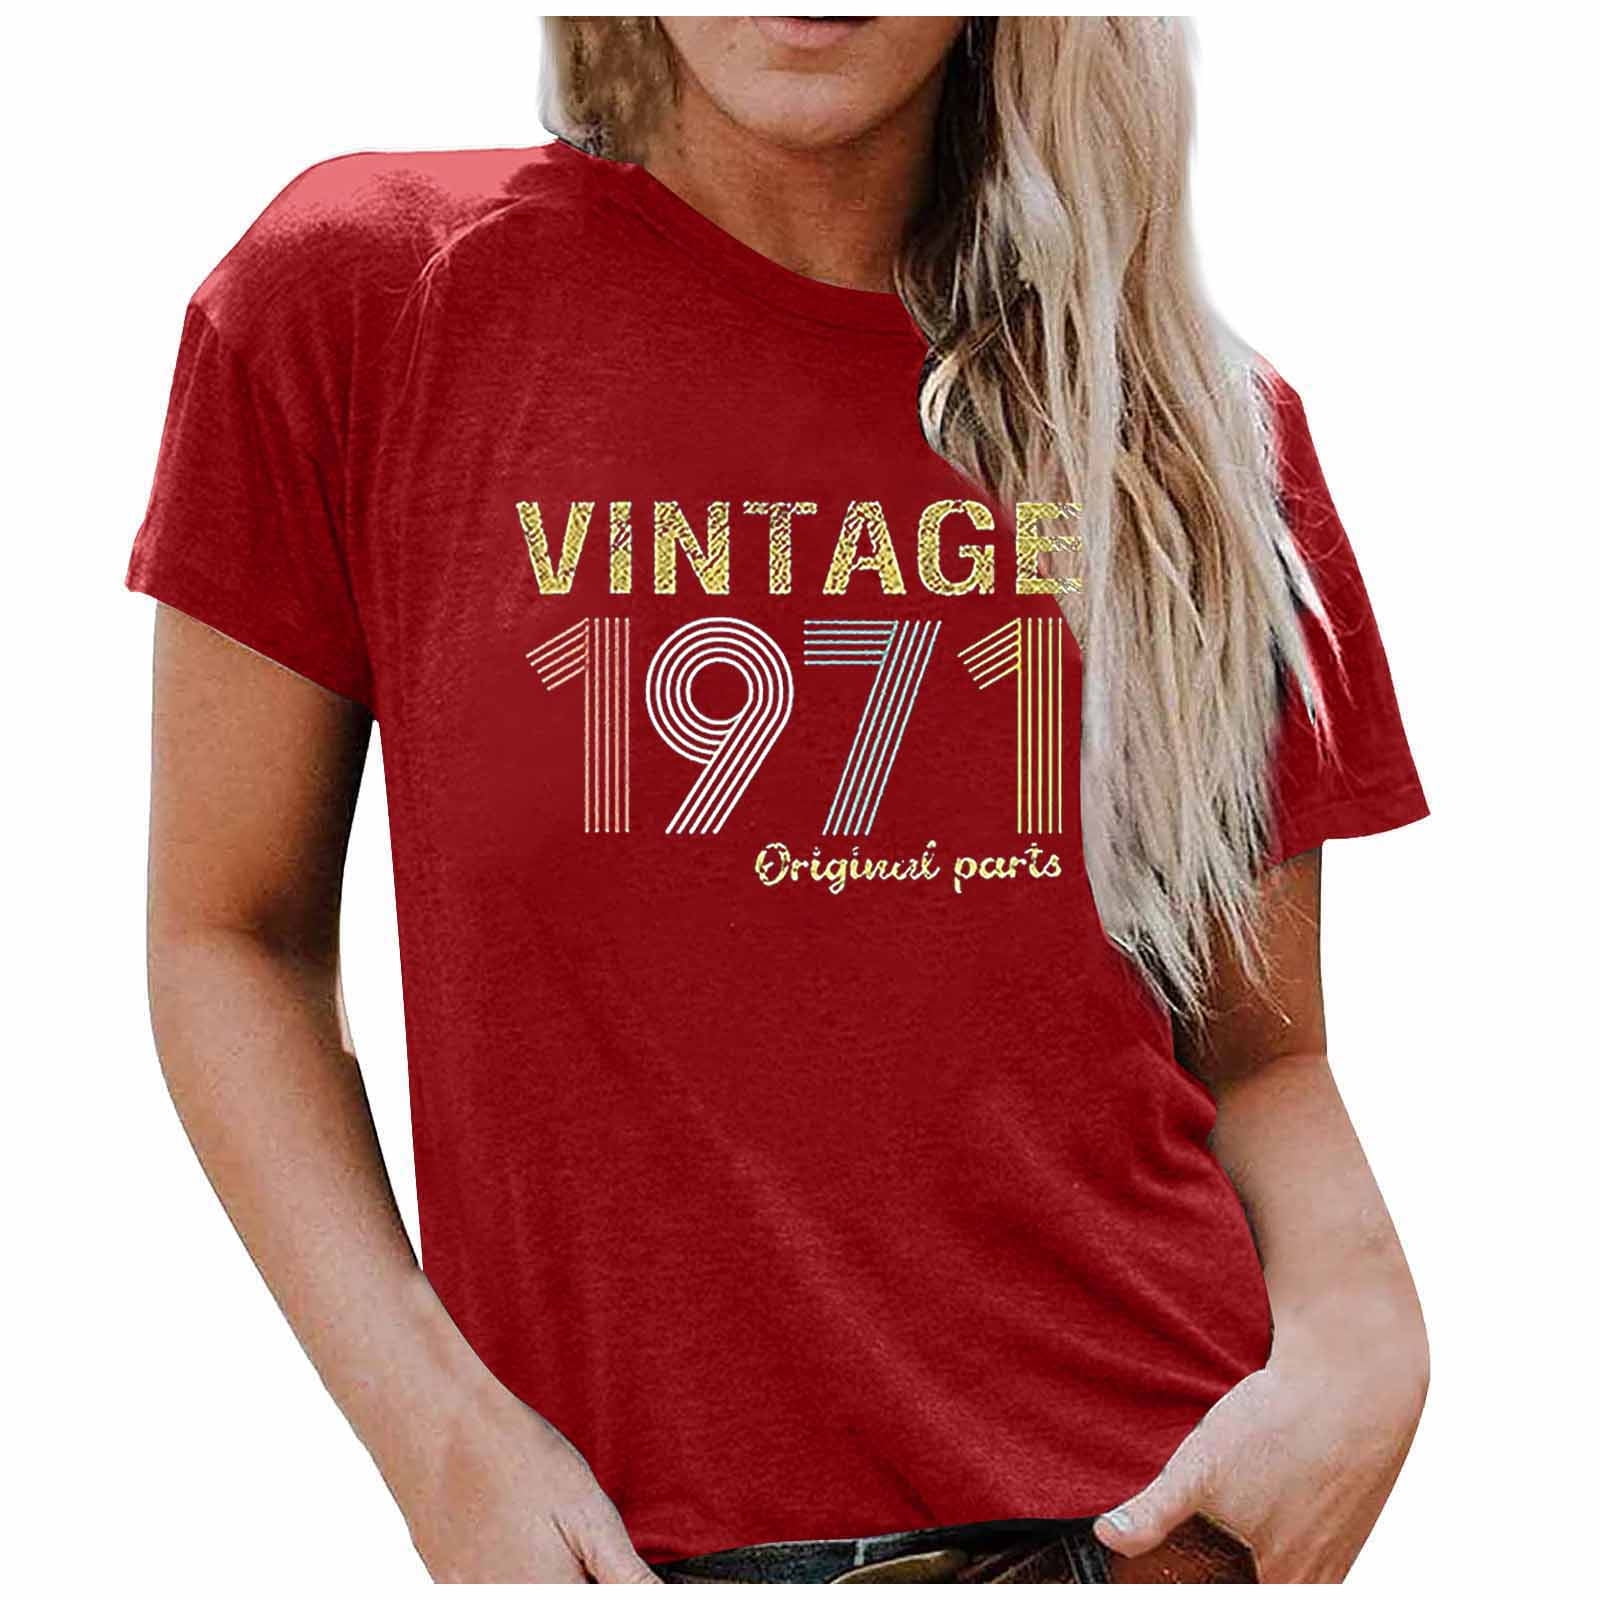 This Gift is Super Cute Vintage T-Shirt 